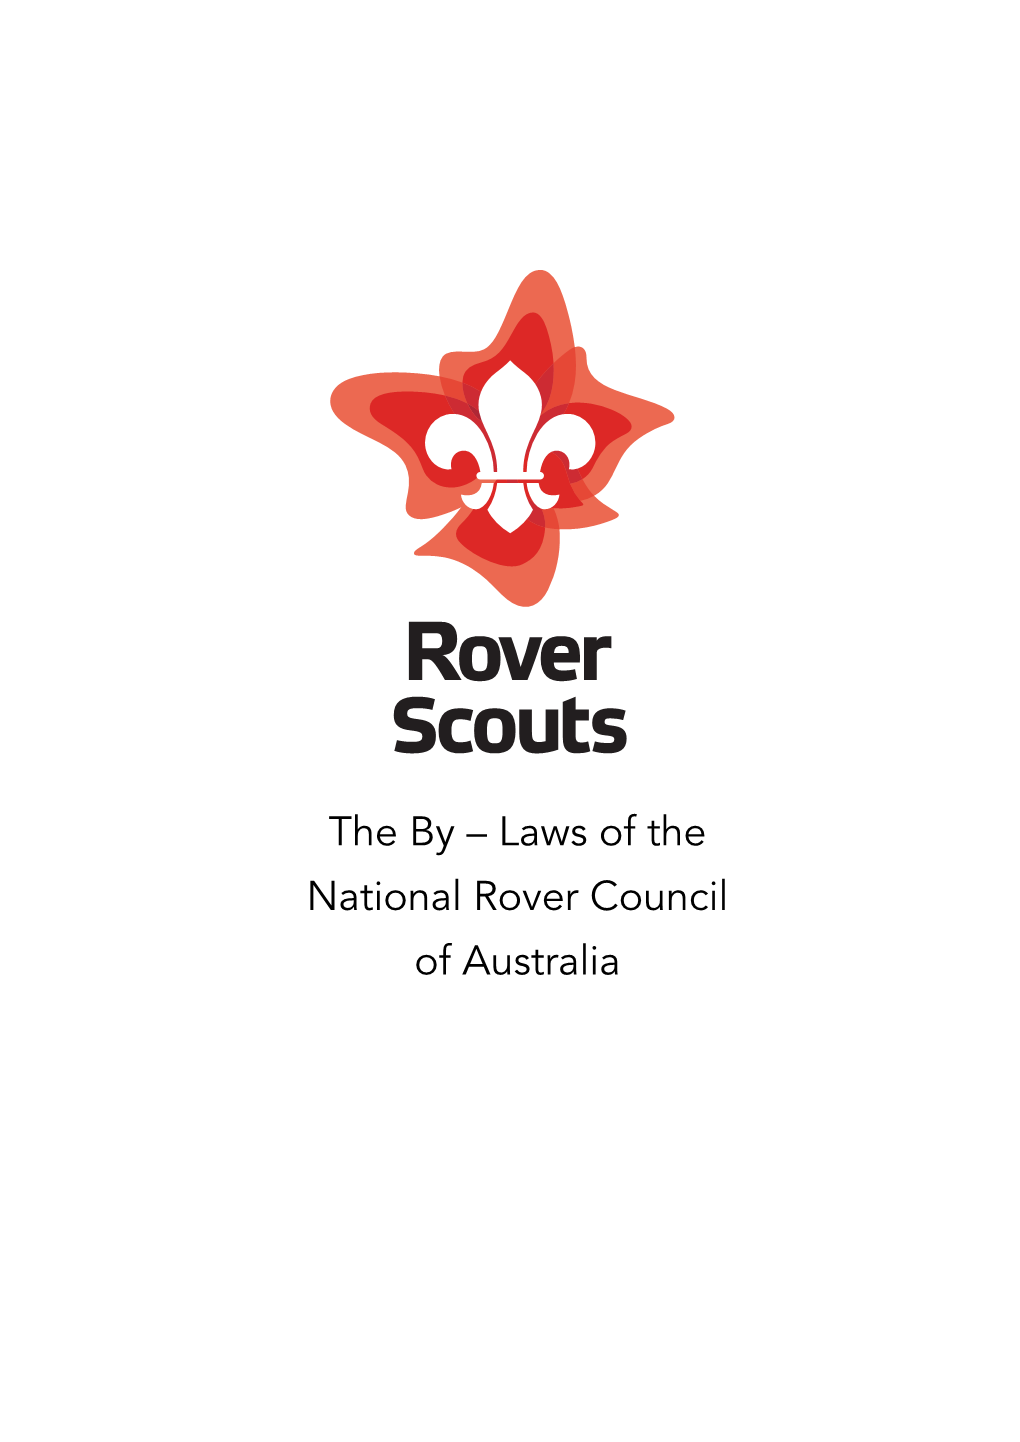 The by – Laws of the National Rover Council of Australia